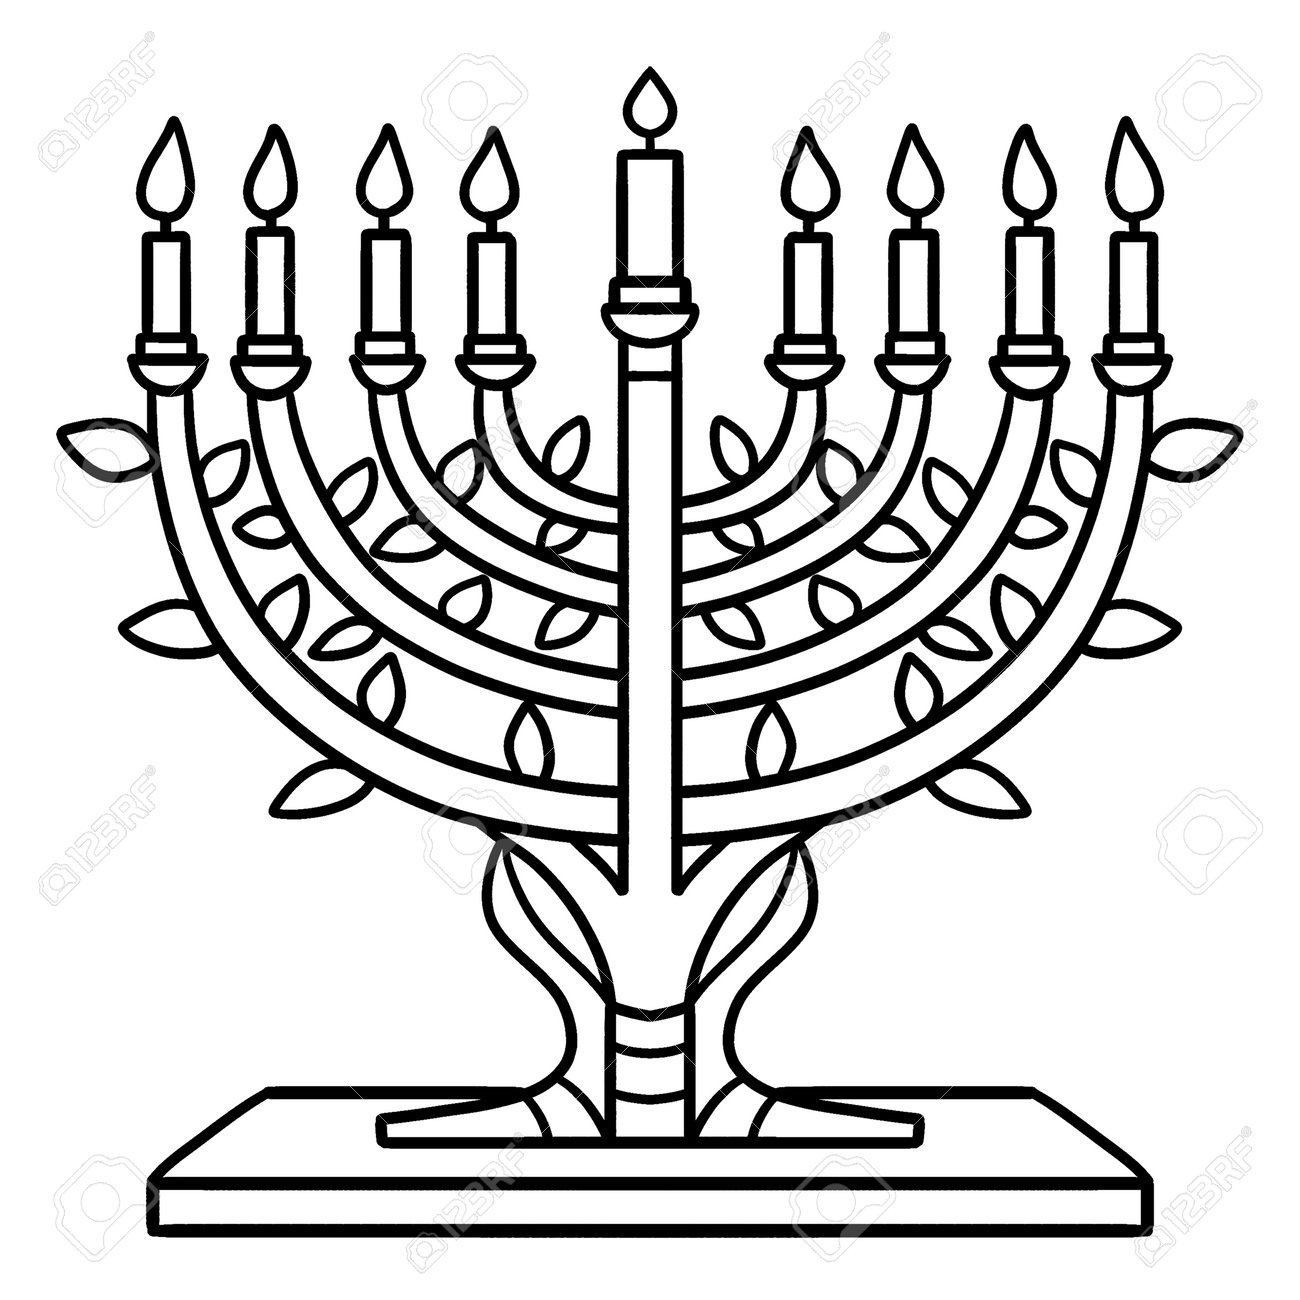 Hanukkah menorah isolated coloring page for kids royalty free svg cliparts vectors and stock illustration image